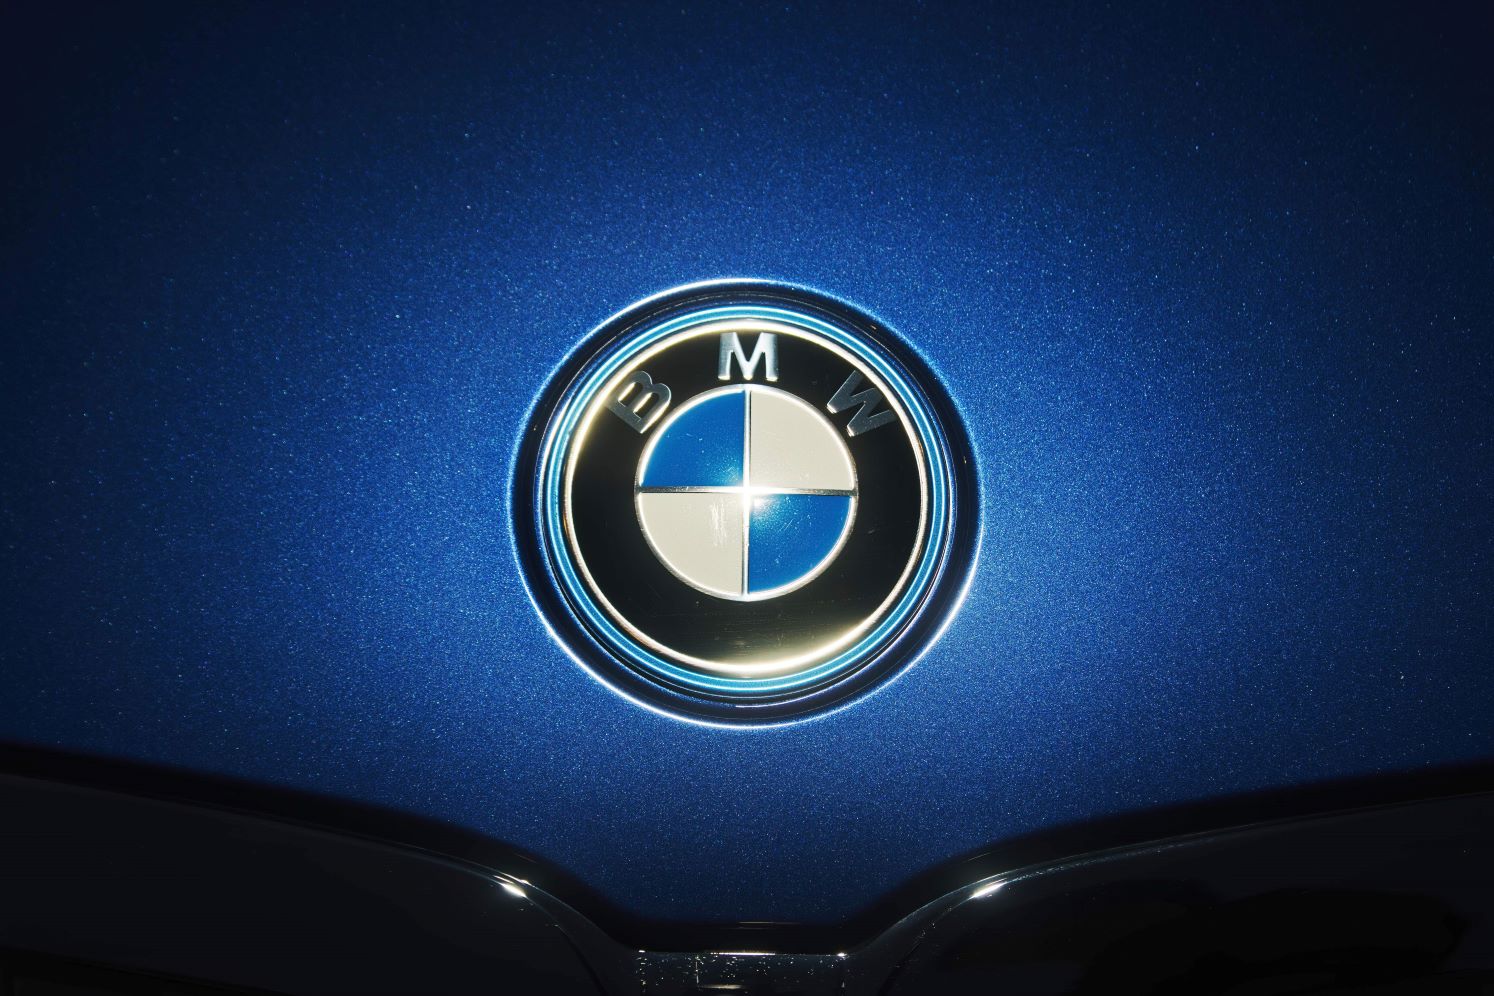 image of a BMW logo on bonnet of the car